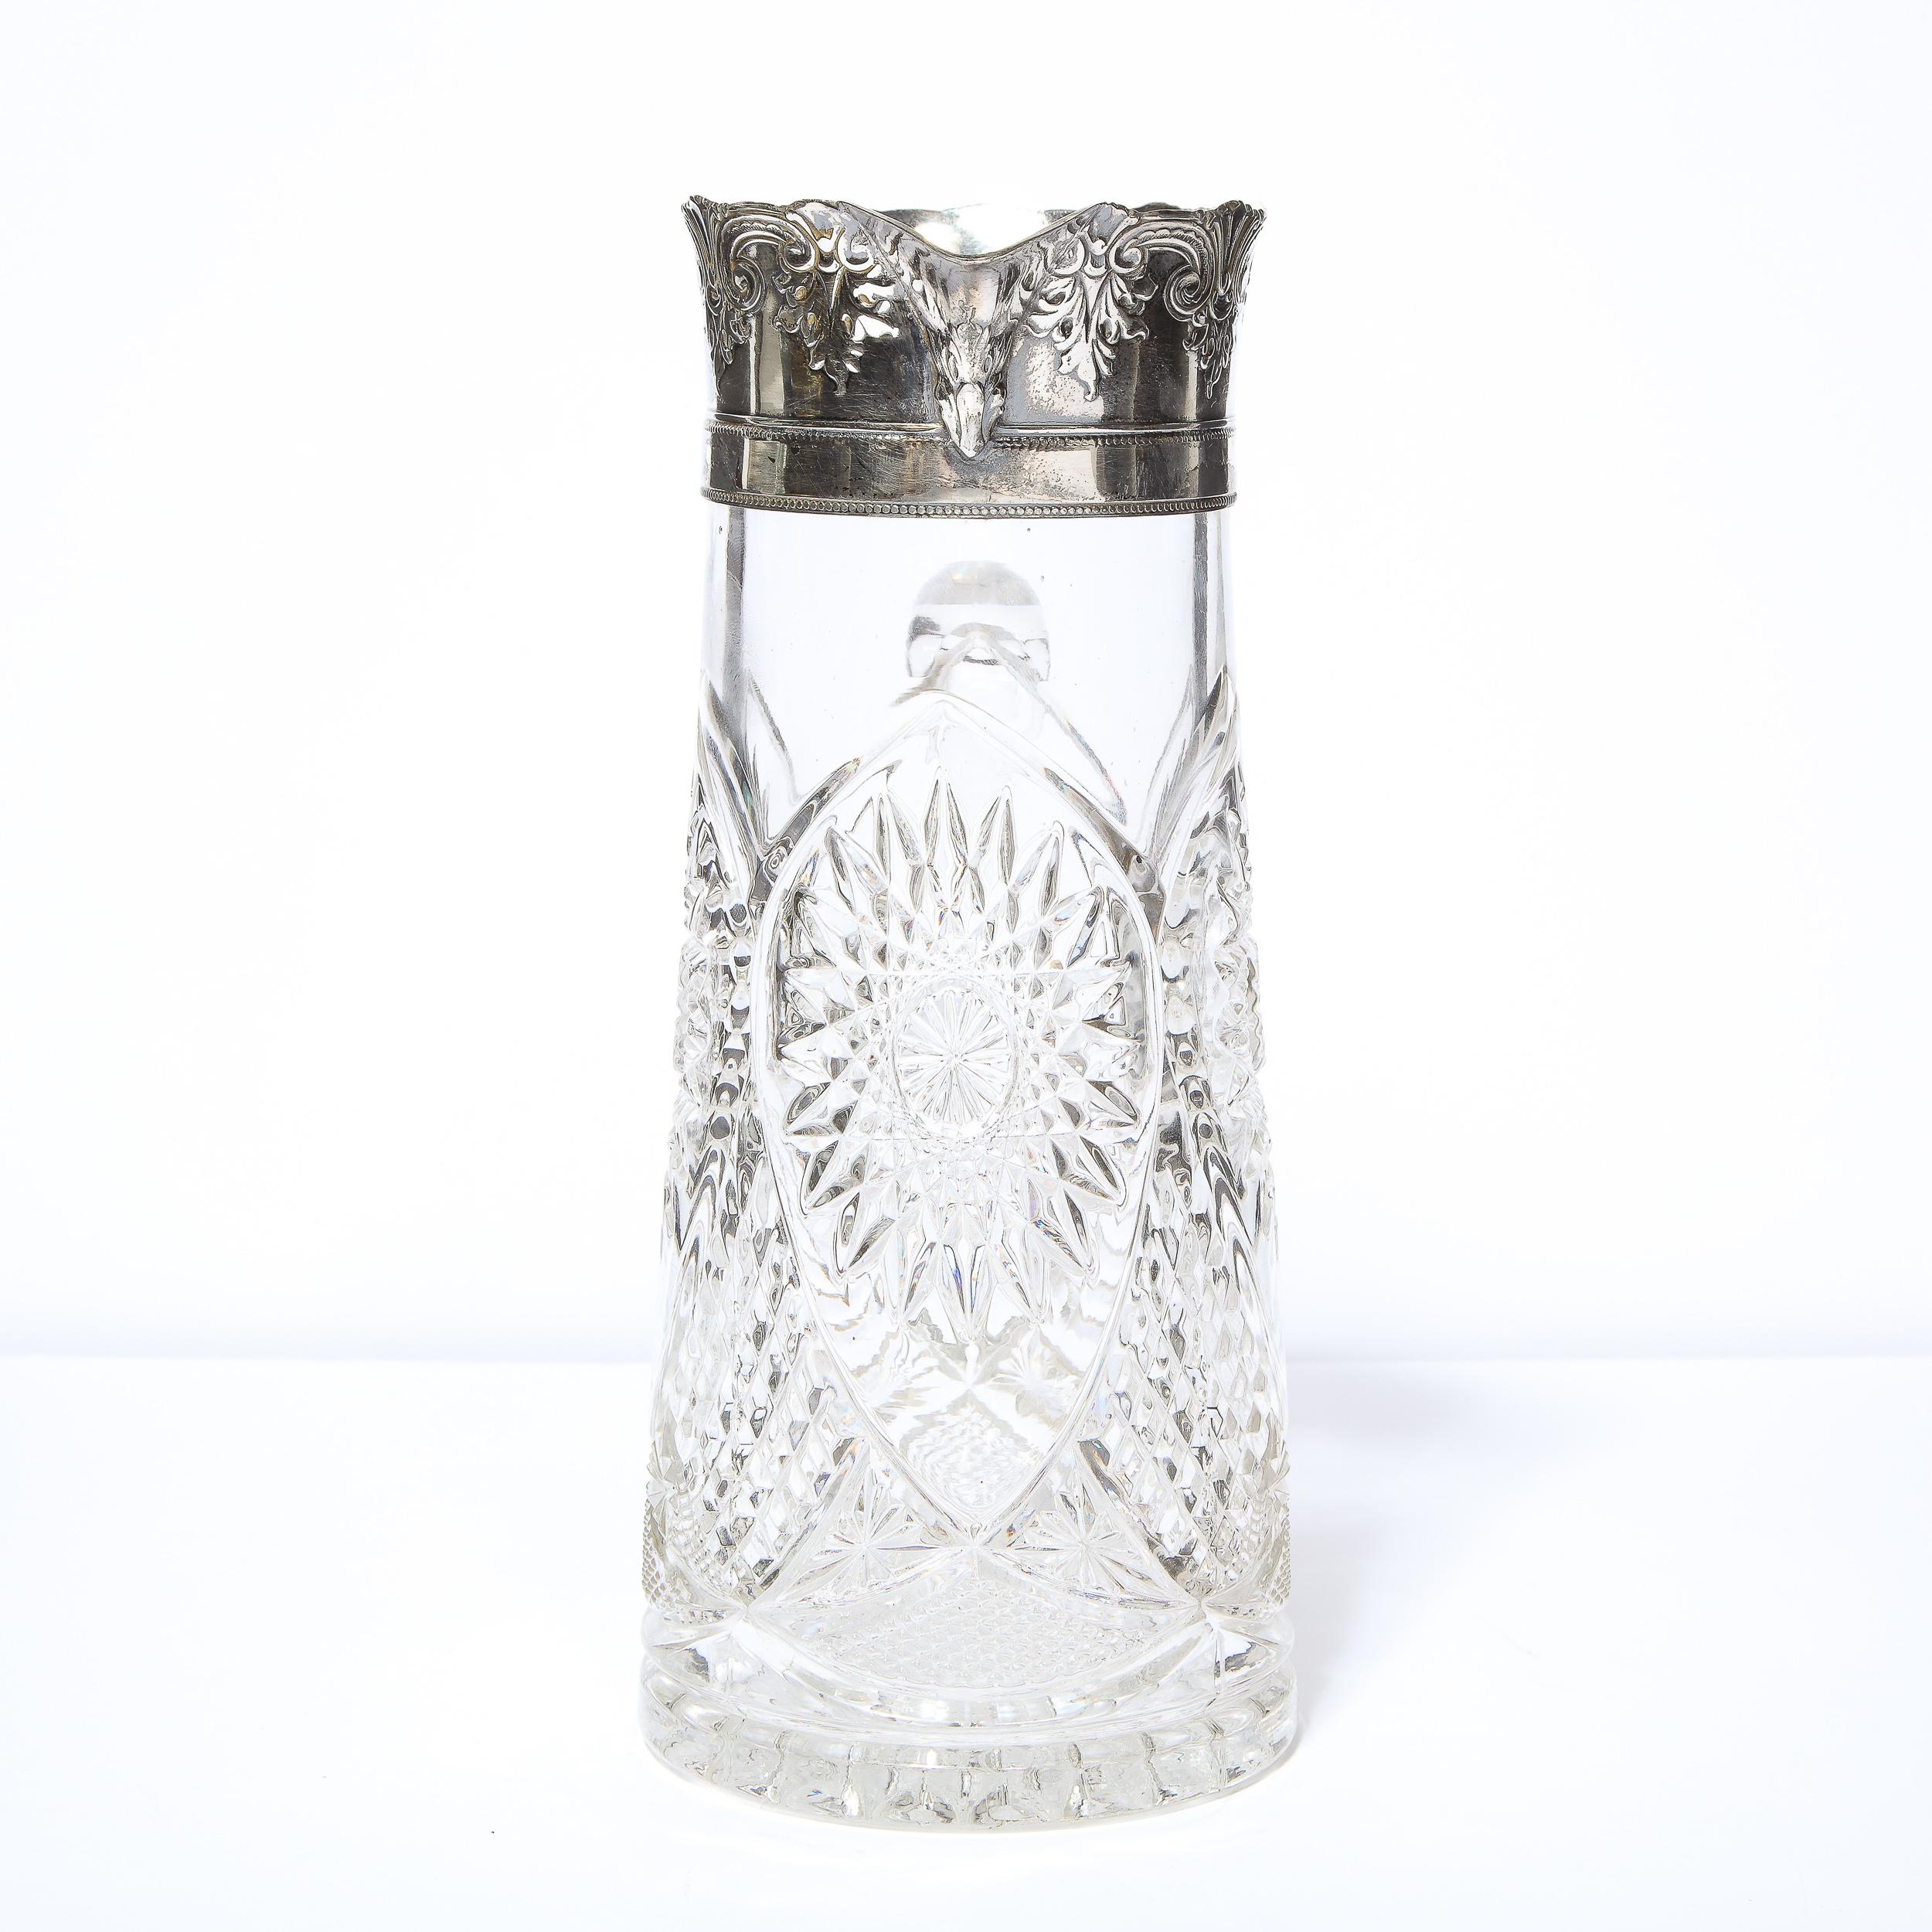 American 1940s Art Deco Pressed Glass Pitcher with Geometric Details & Silver Plated Top